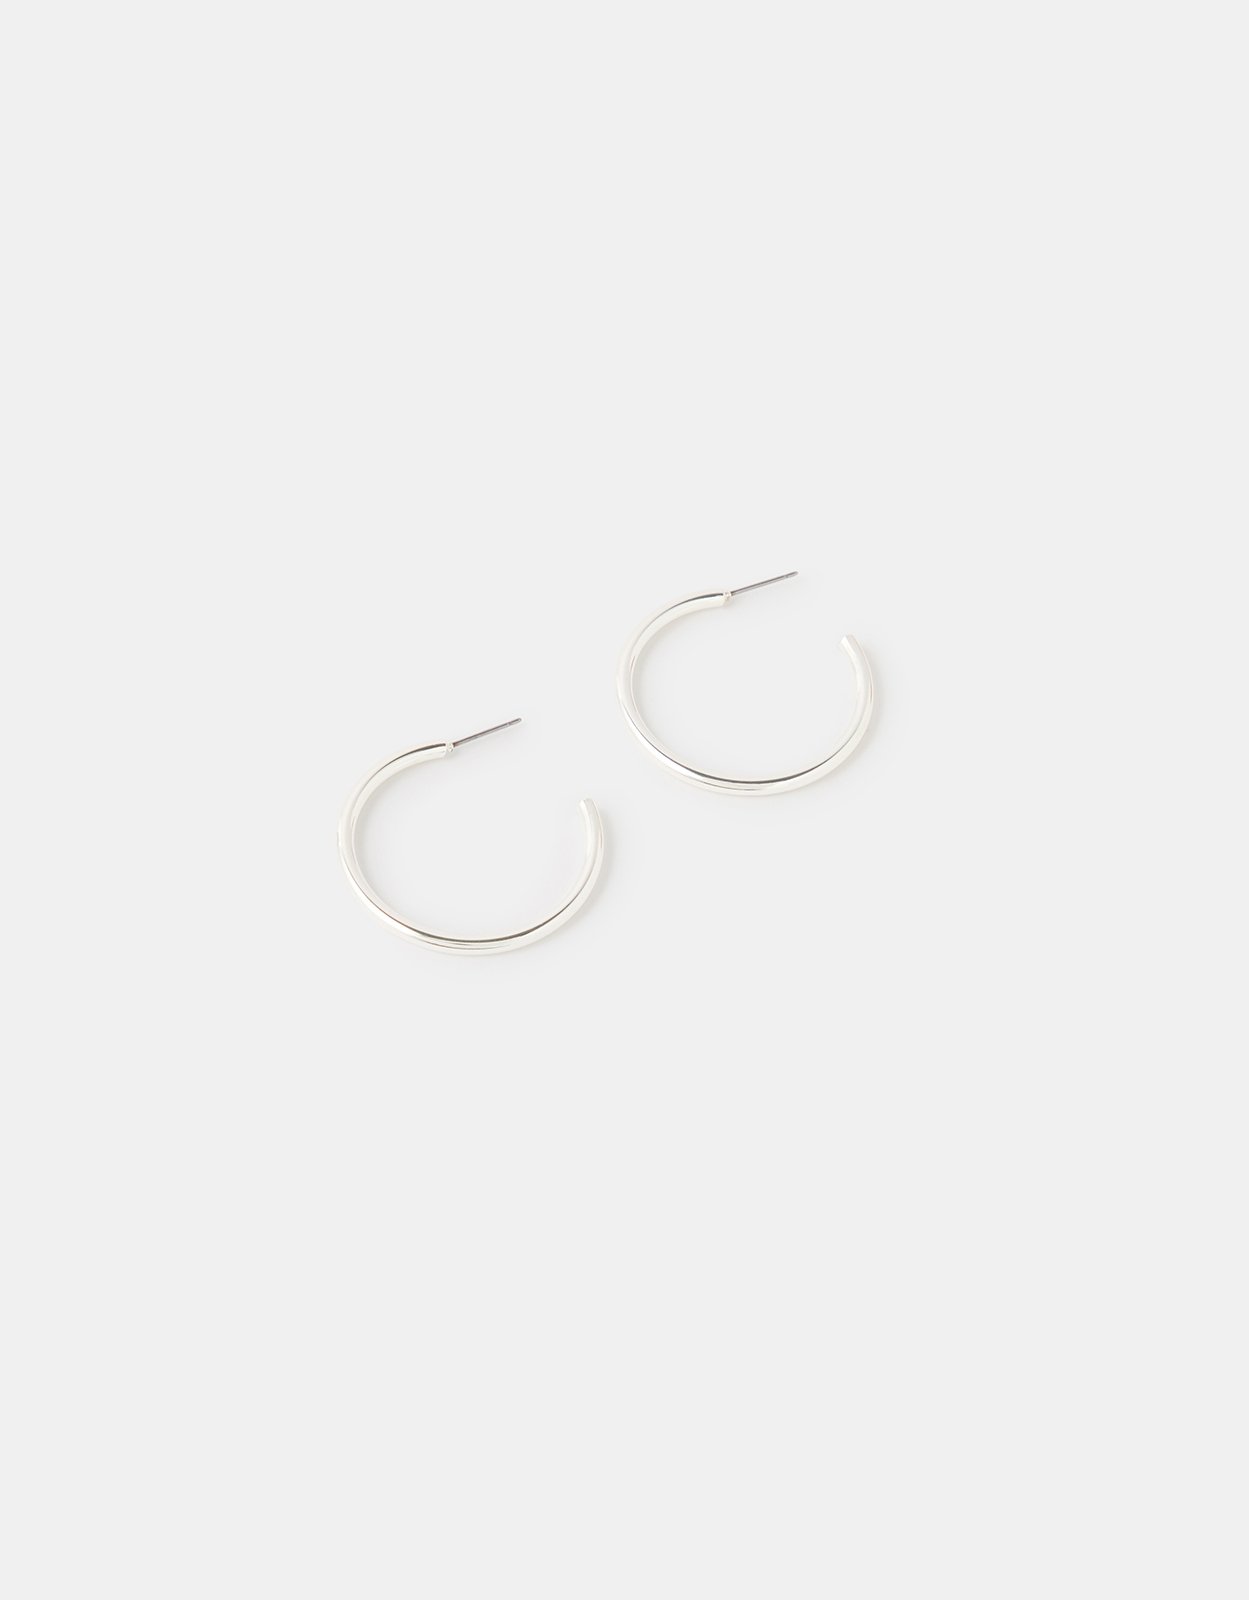 Accessorize Women's Medium Tube Hoops Silver, Size: One Size